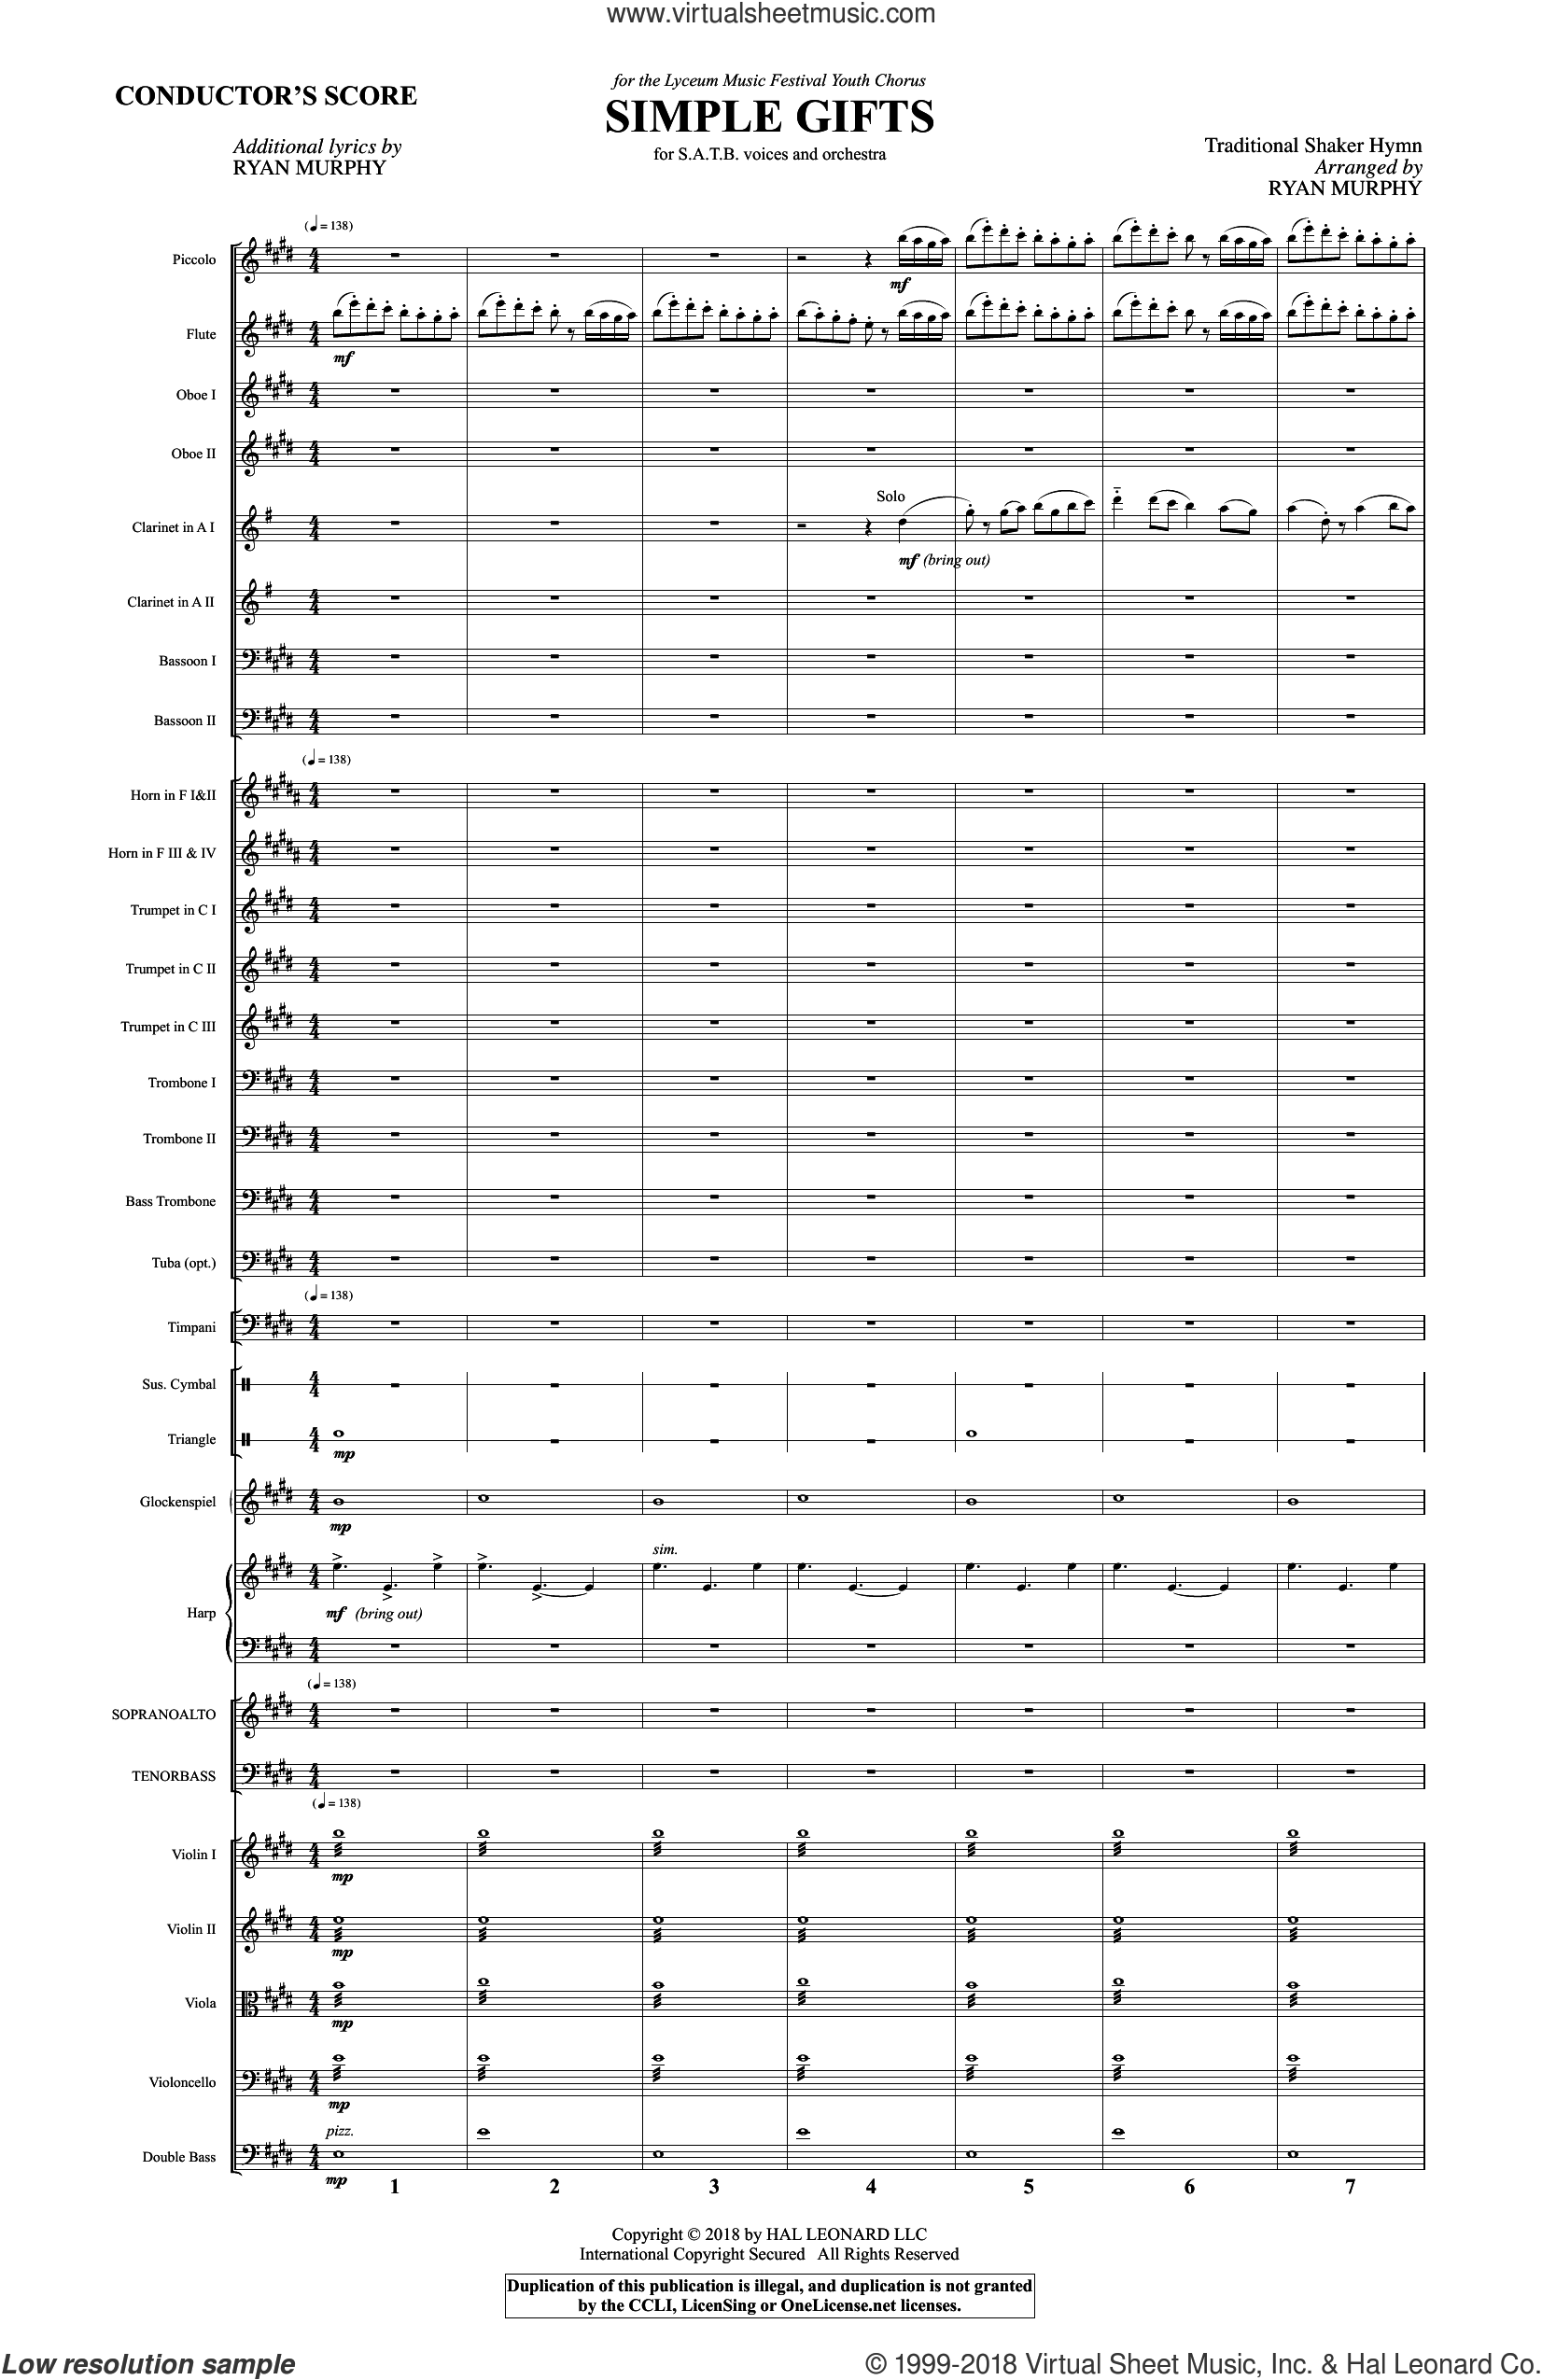 https://cdn3.virtualsheetmusic.com/images/first_pages/HL/HL-416480First_BIG.png